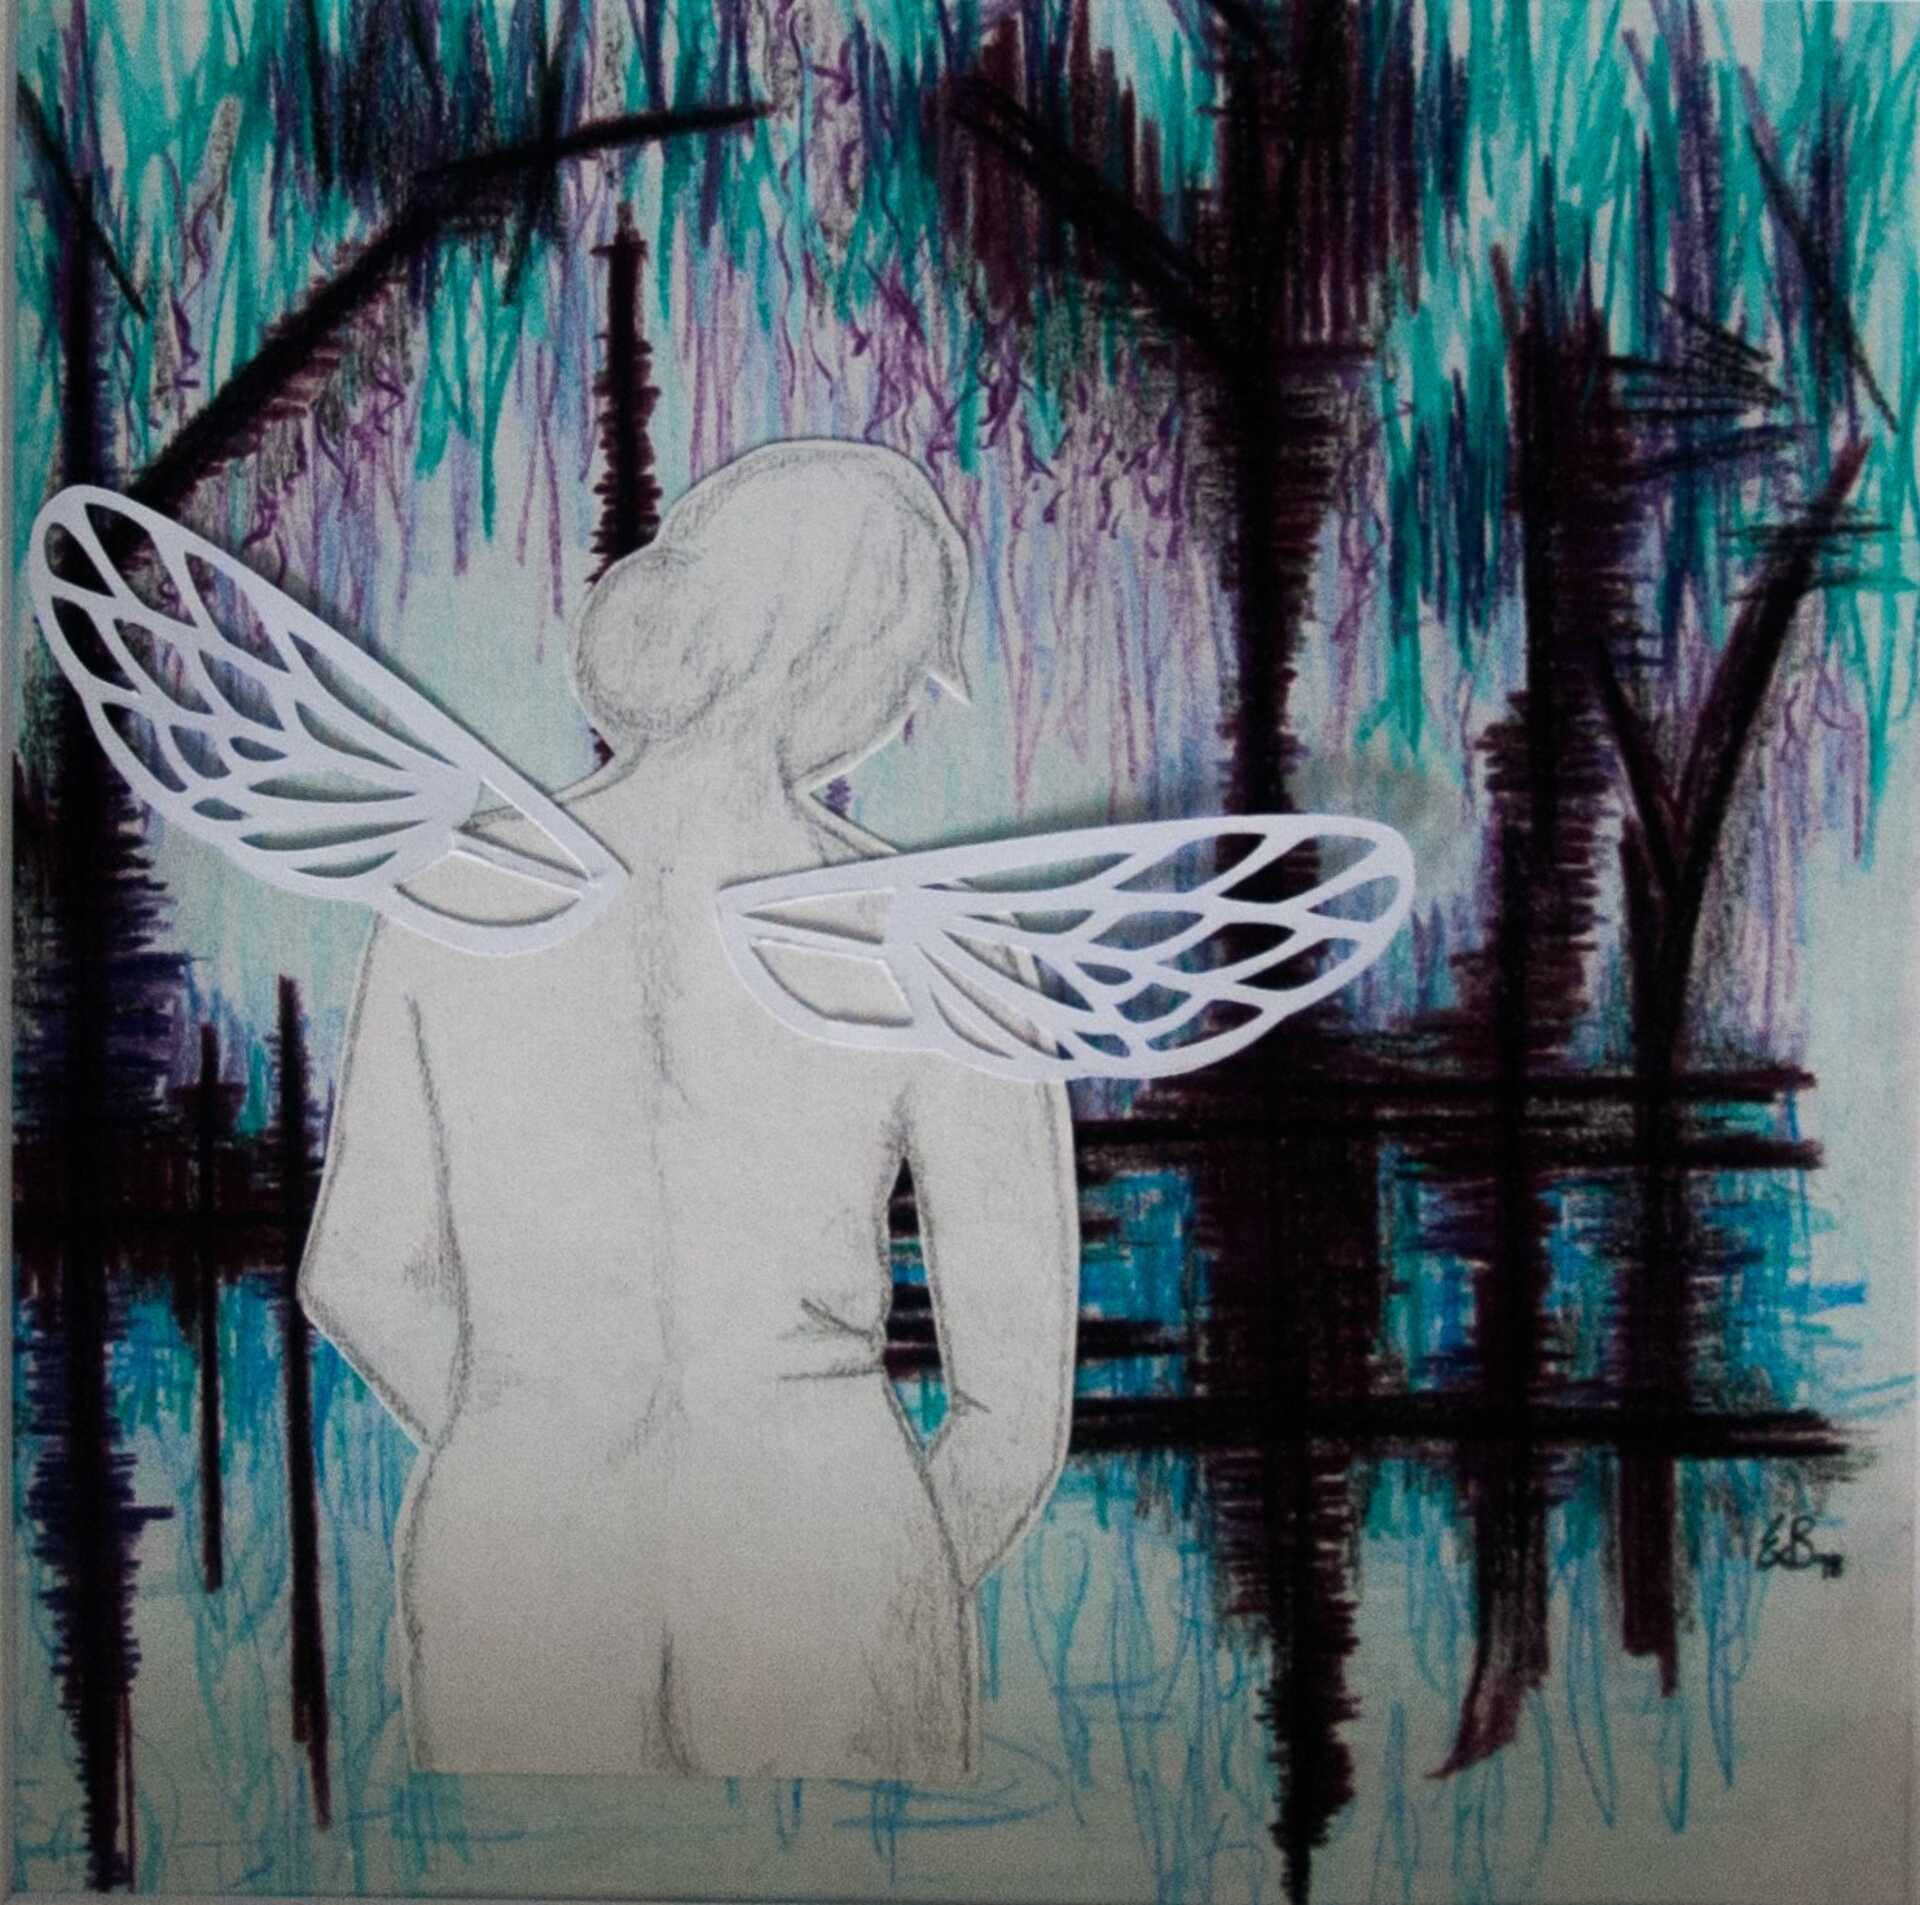 Pencil and collage work 'Contemplation' by Libby Bloxham. The base is a moody, abstracted landscape in coloured pencil, using blue, green and cool purple tones under stark black silhouettes, evoking trees reflected in still water. Layered over this is a cut-out pencil sketch of a nude female figure, shown from behind as if bathing. Insect-like wings cut from white paper are attached to the woman's shoulders.